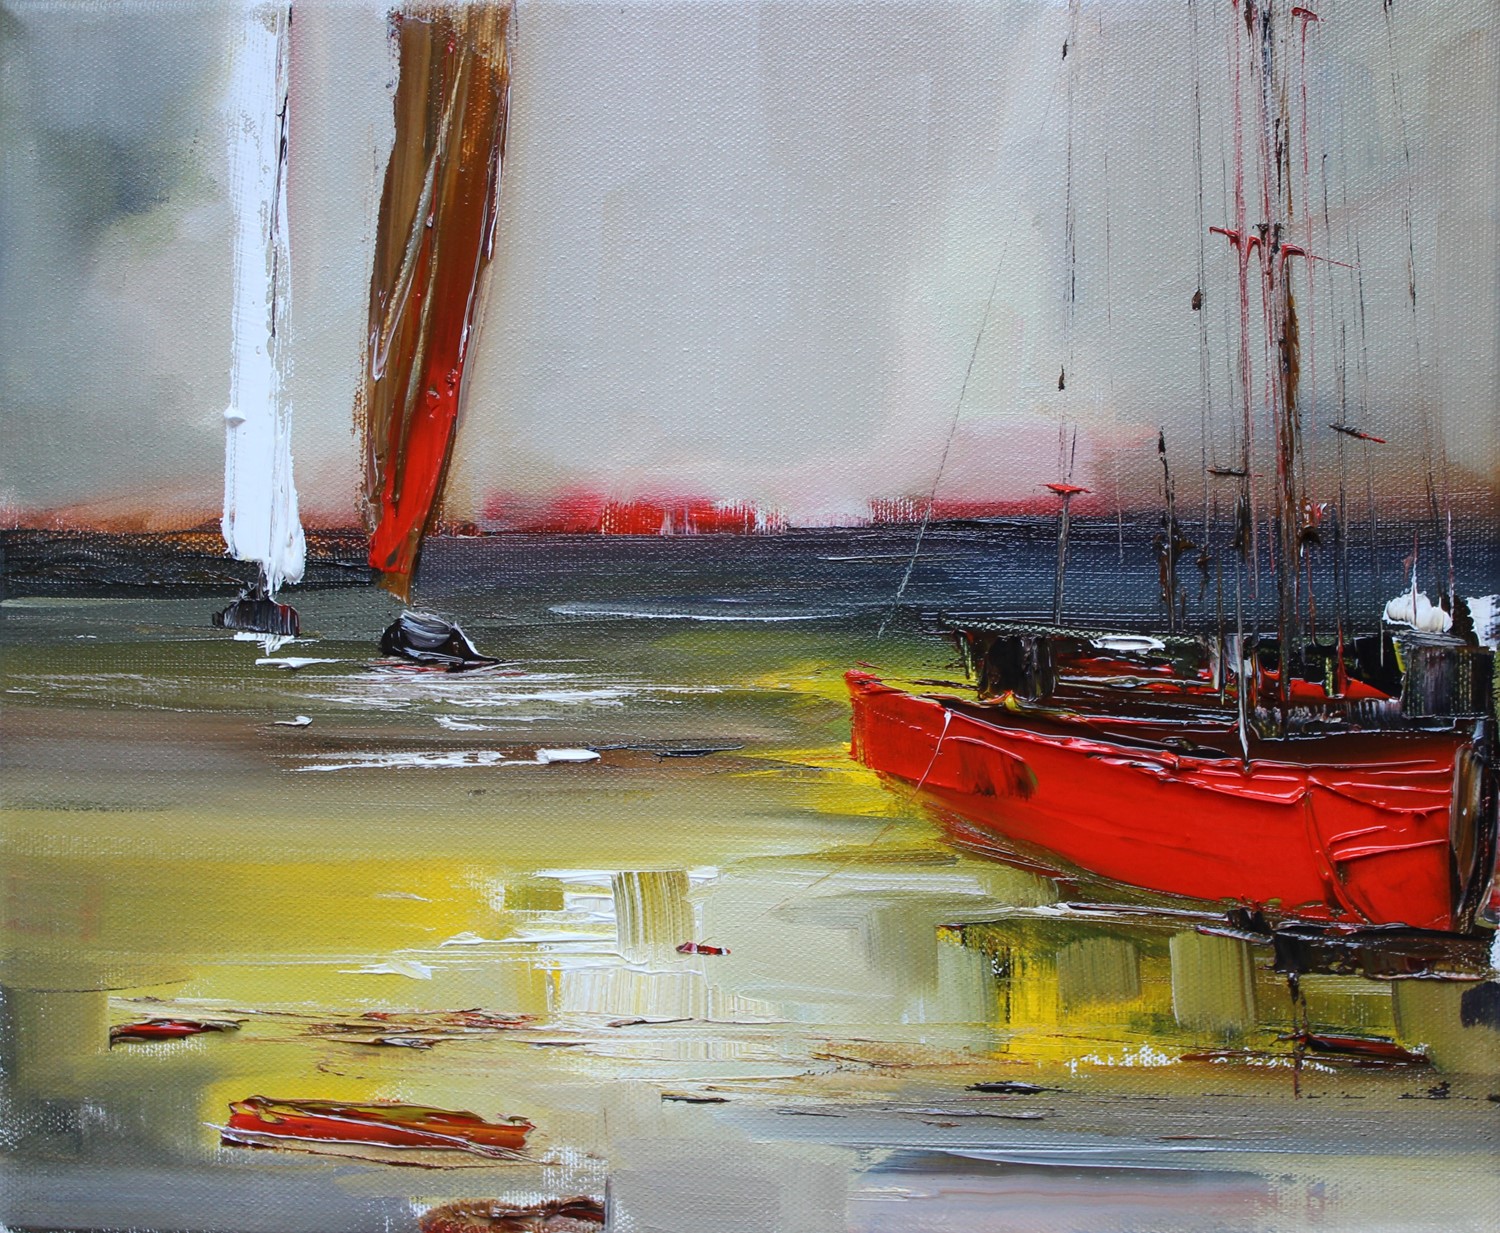 'Resting at the Shore ' by artist Rosanne Barr